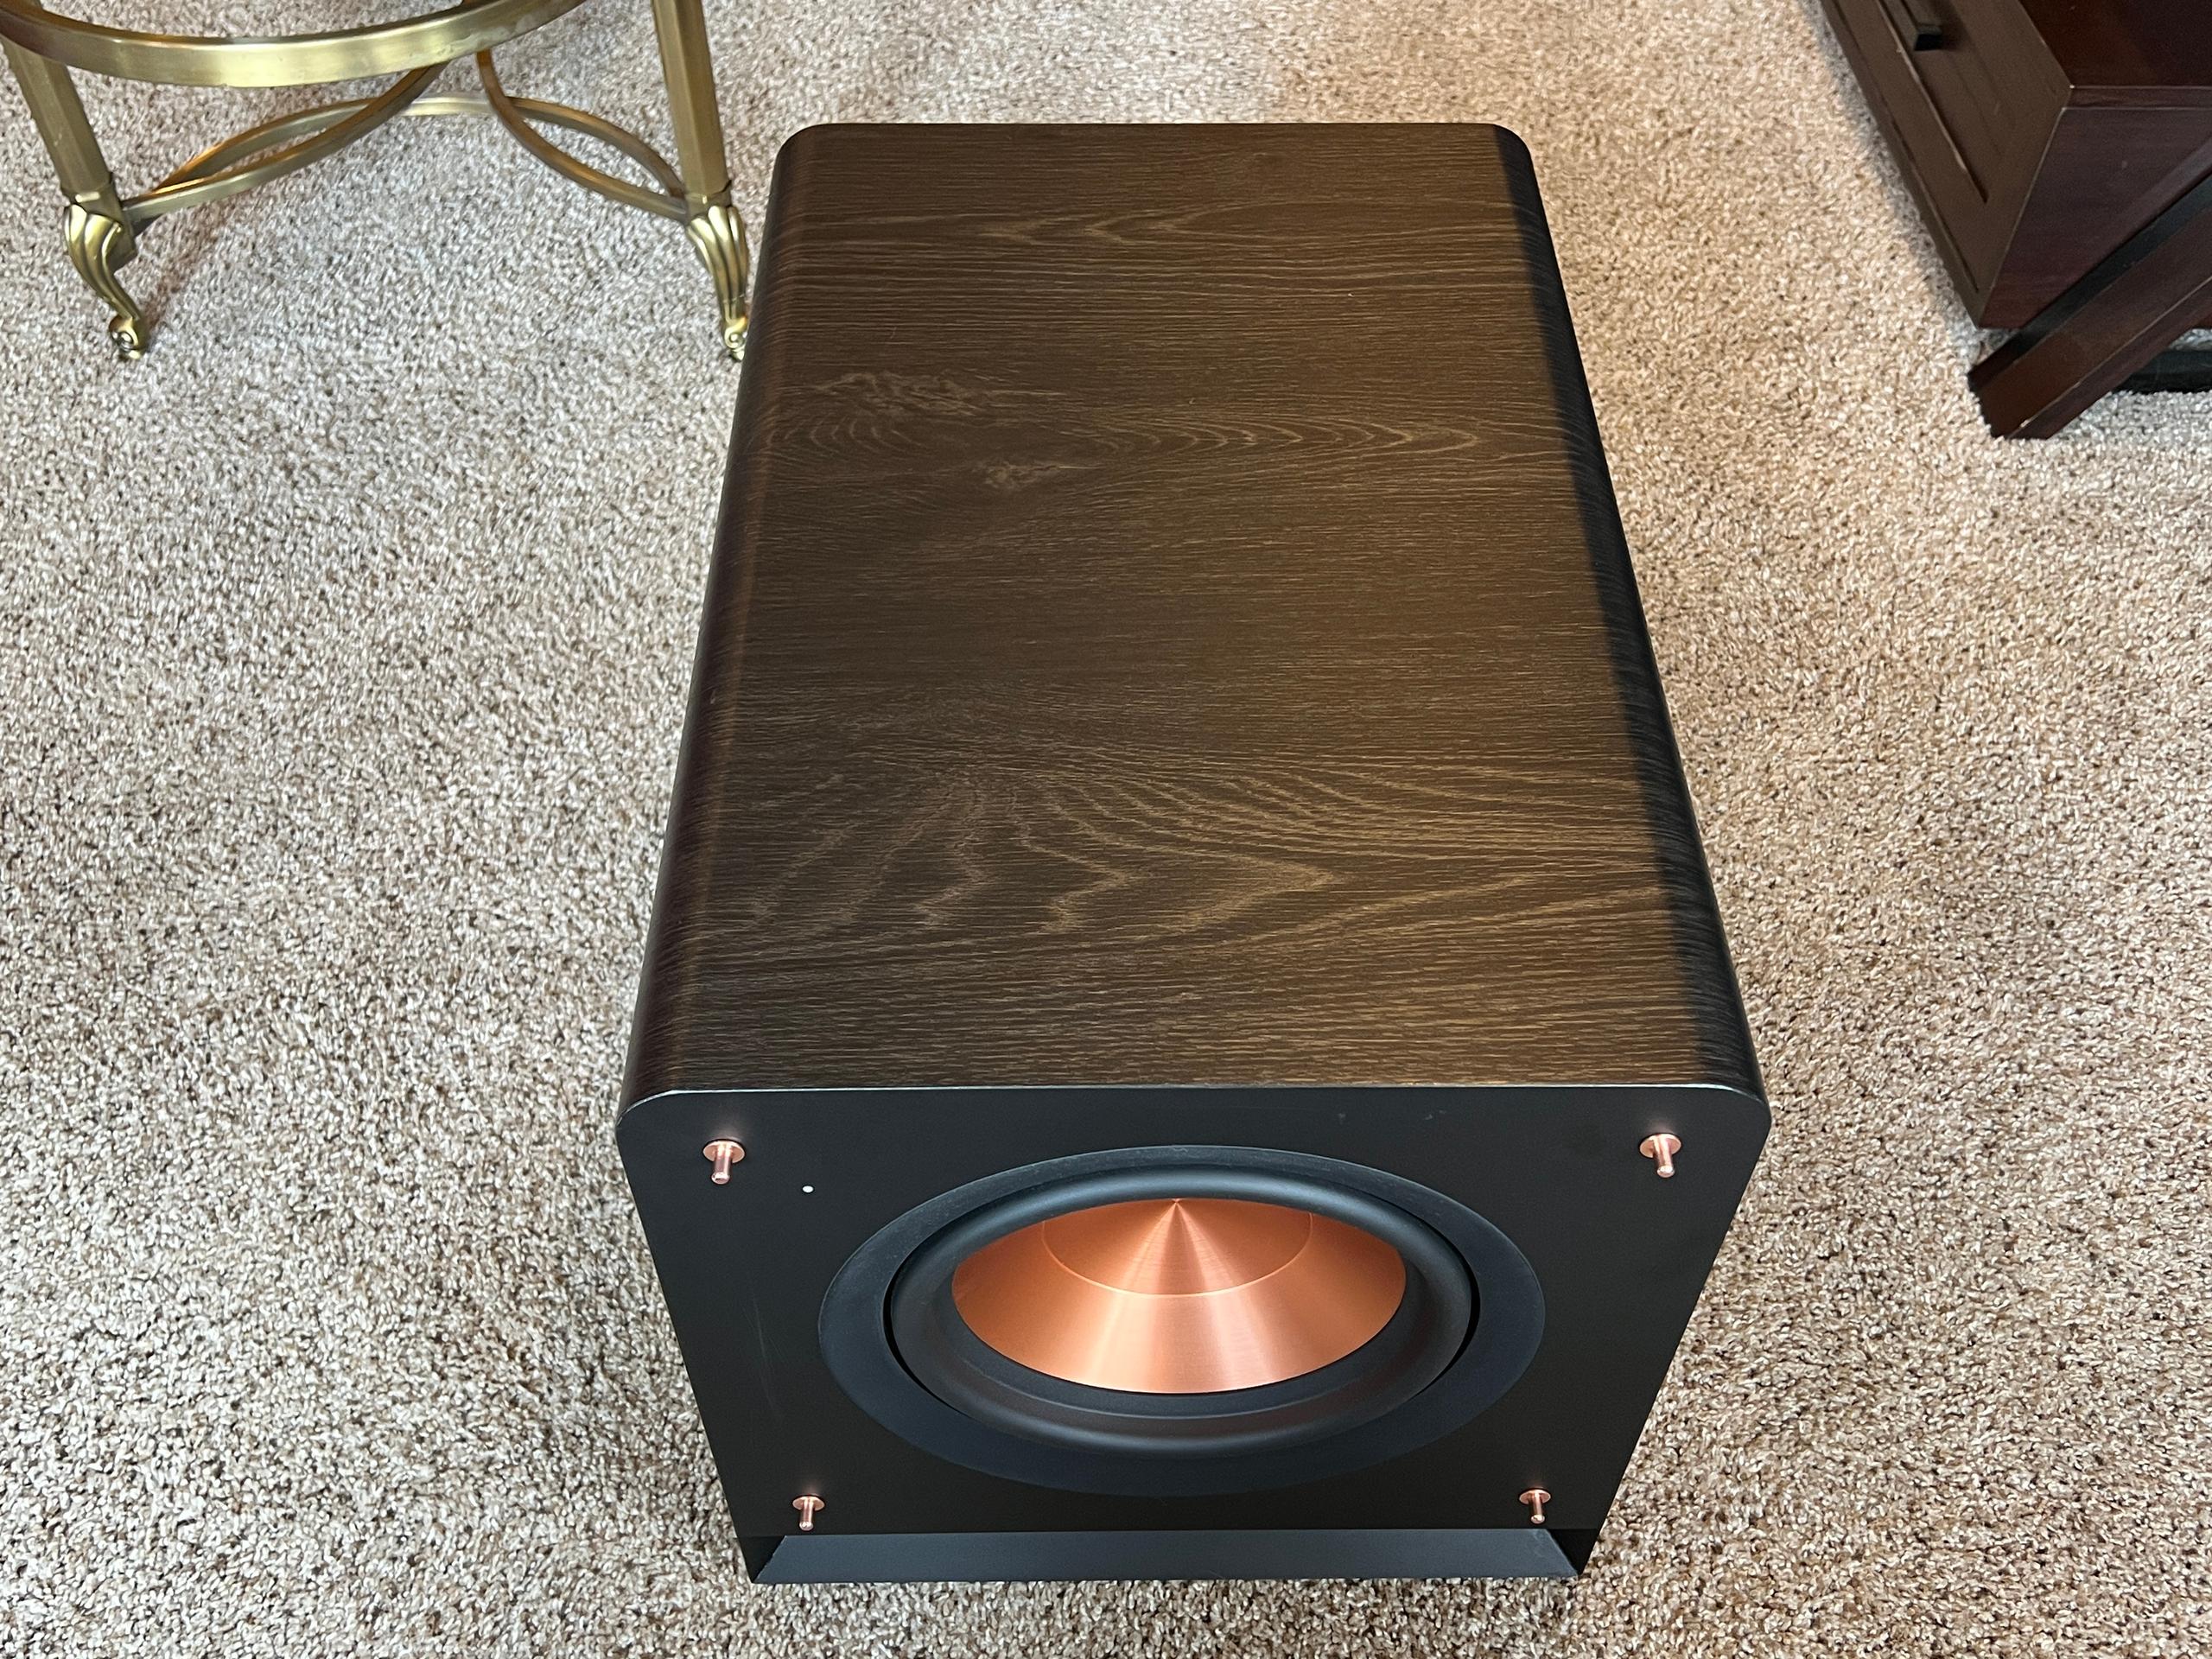 Klipsch RP-1000SW subwoofer with open faced cone overhead